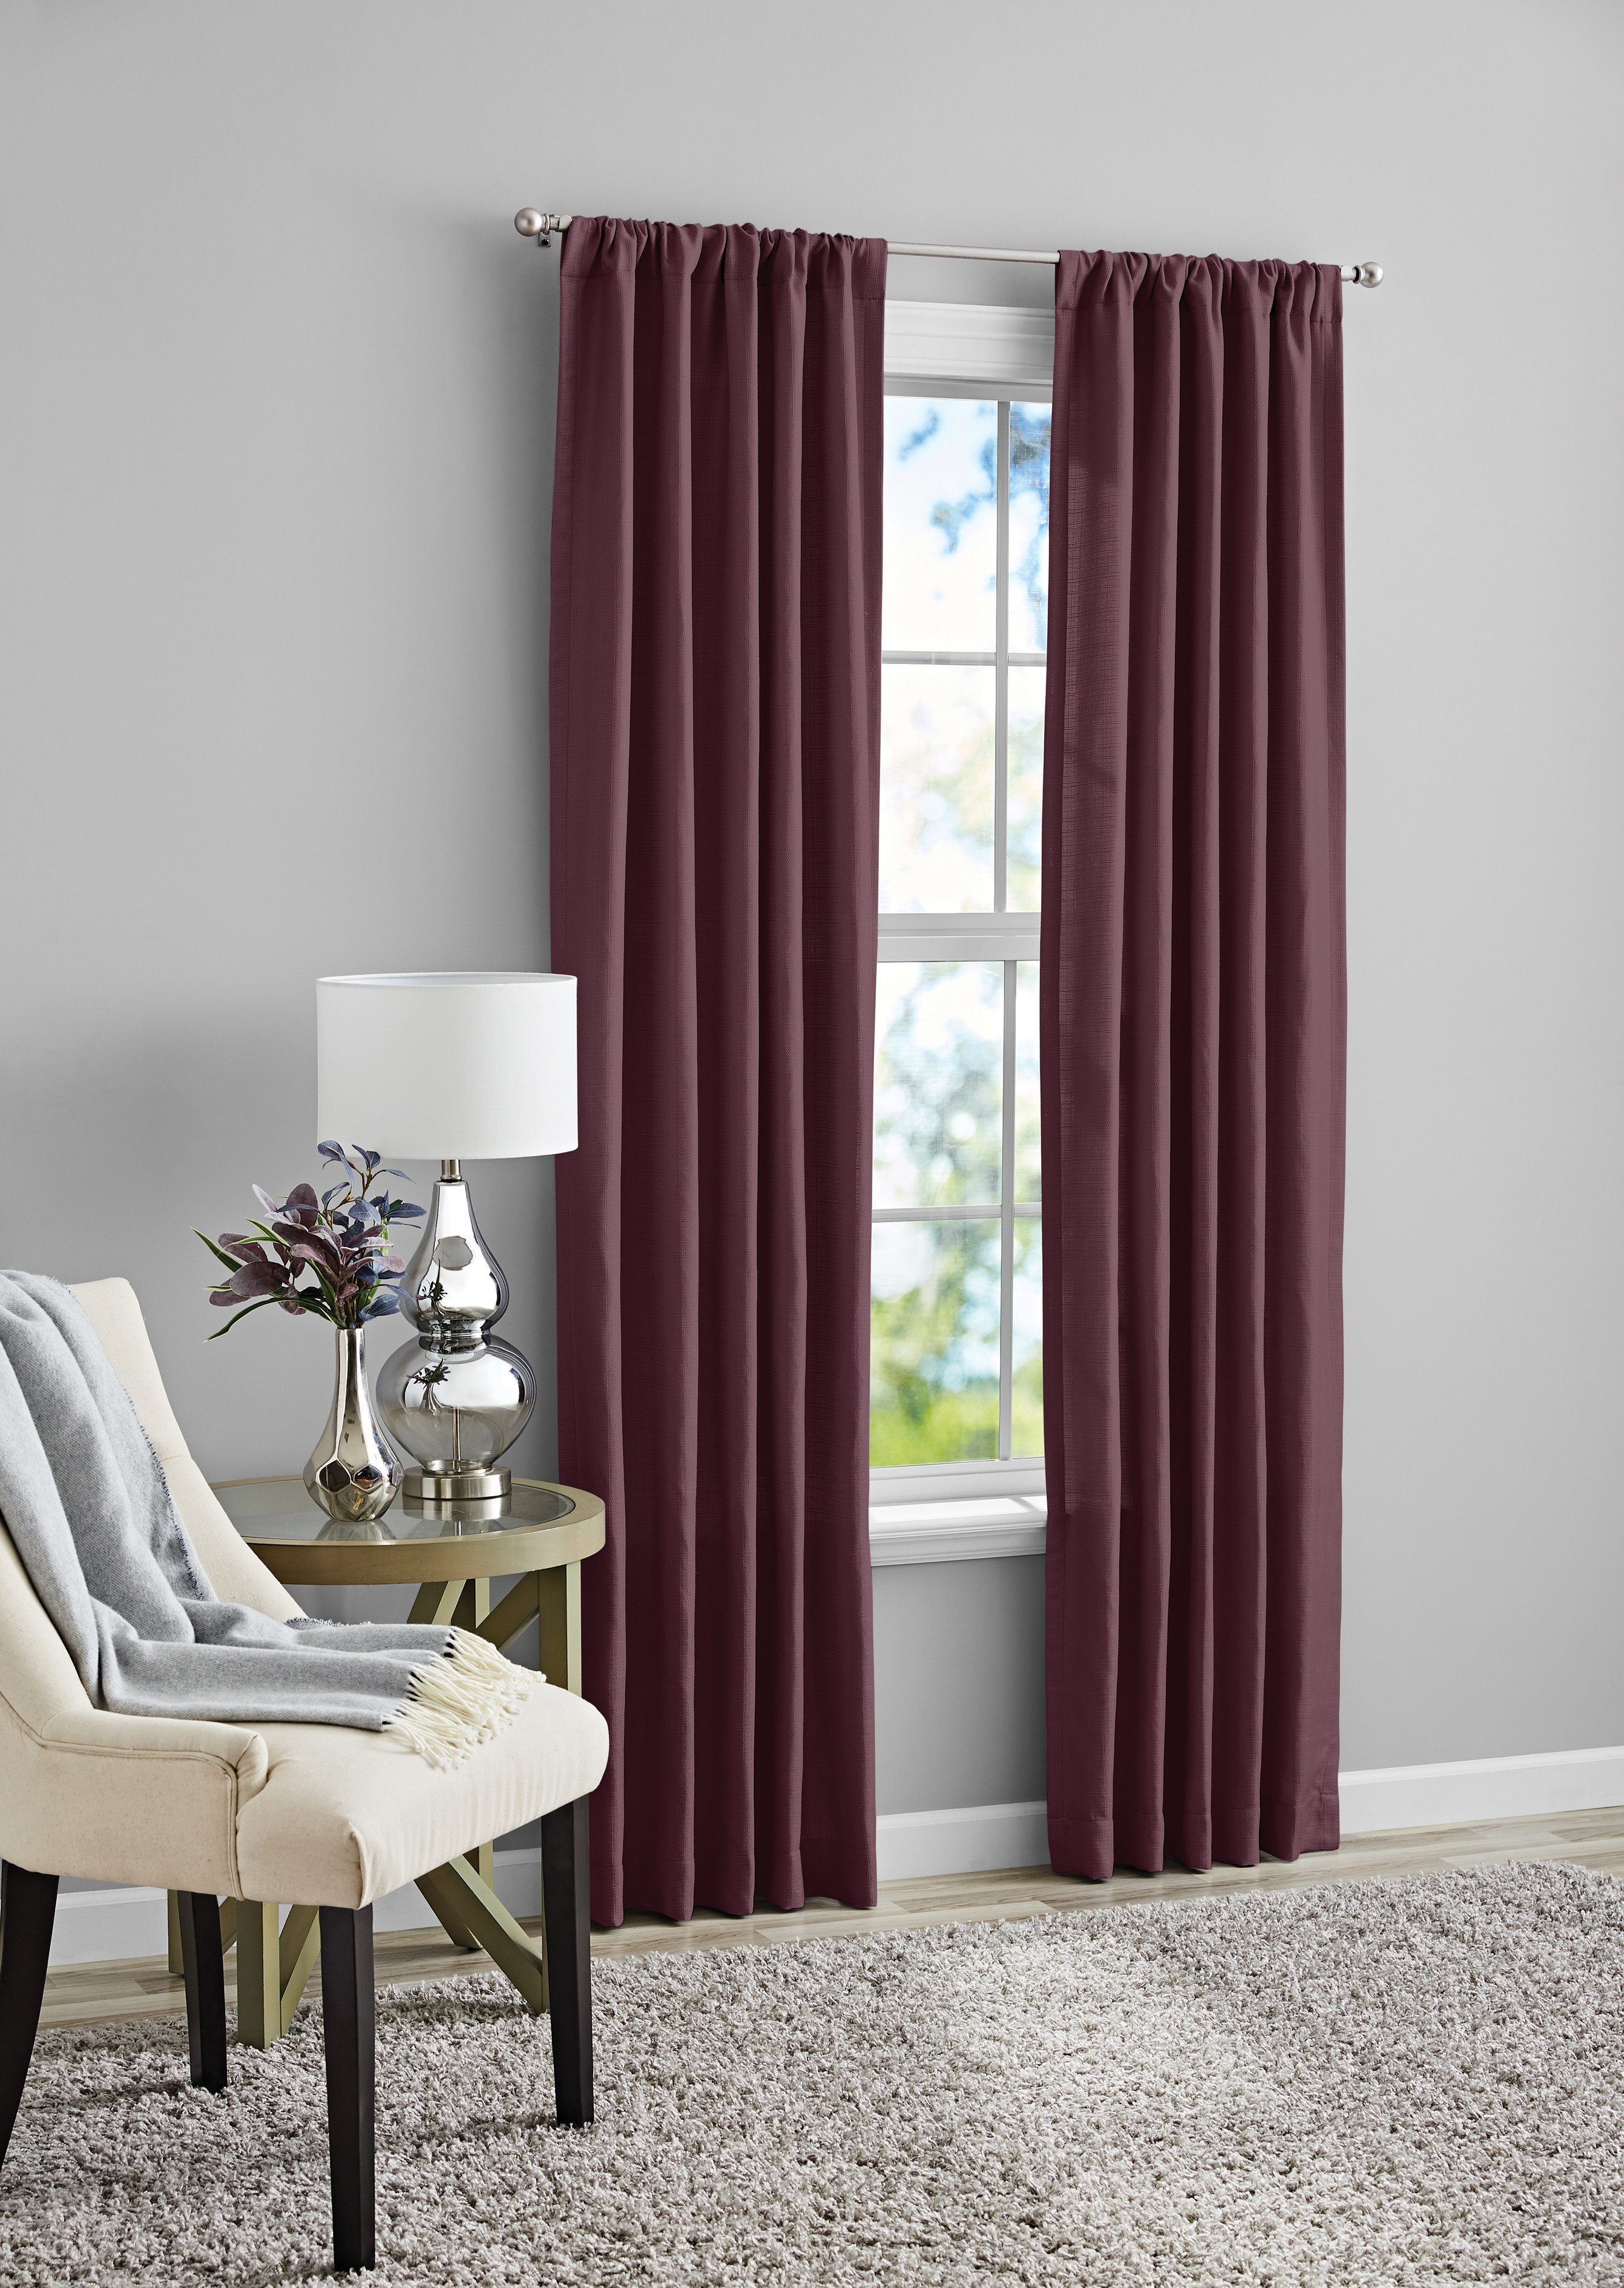 Mainstays Southport Burgundy Solid Color Light Filtering Rod Pocket Curtain Panel Pair, 40" x 84" - image 1 of 10